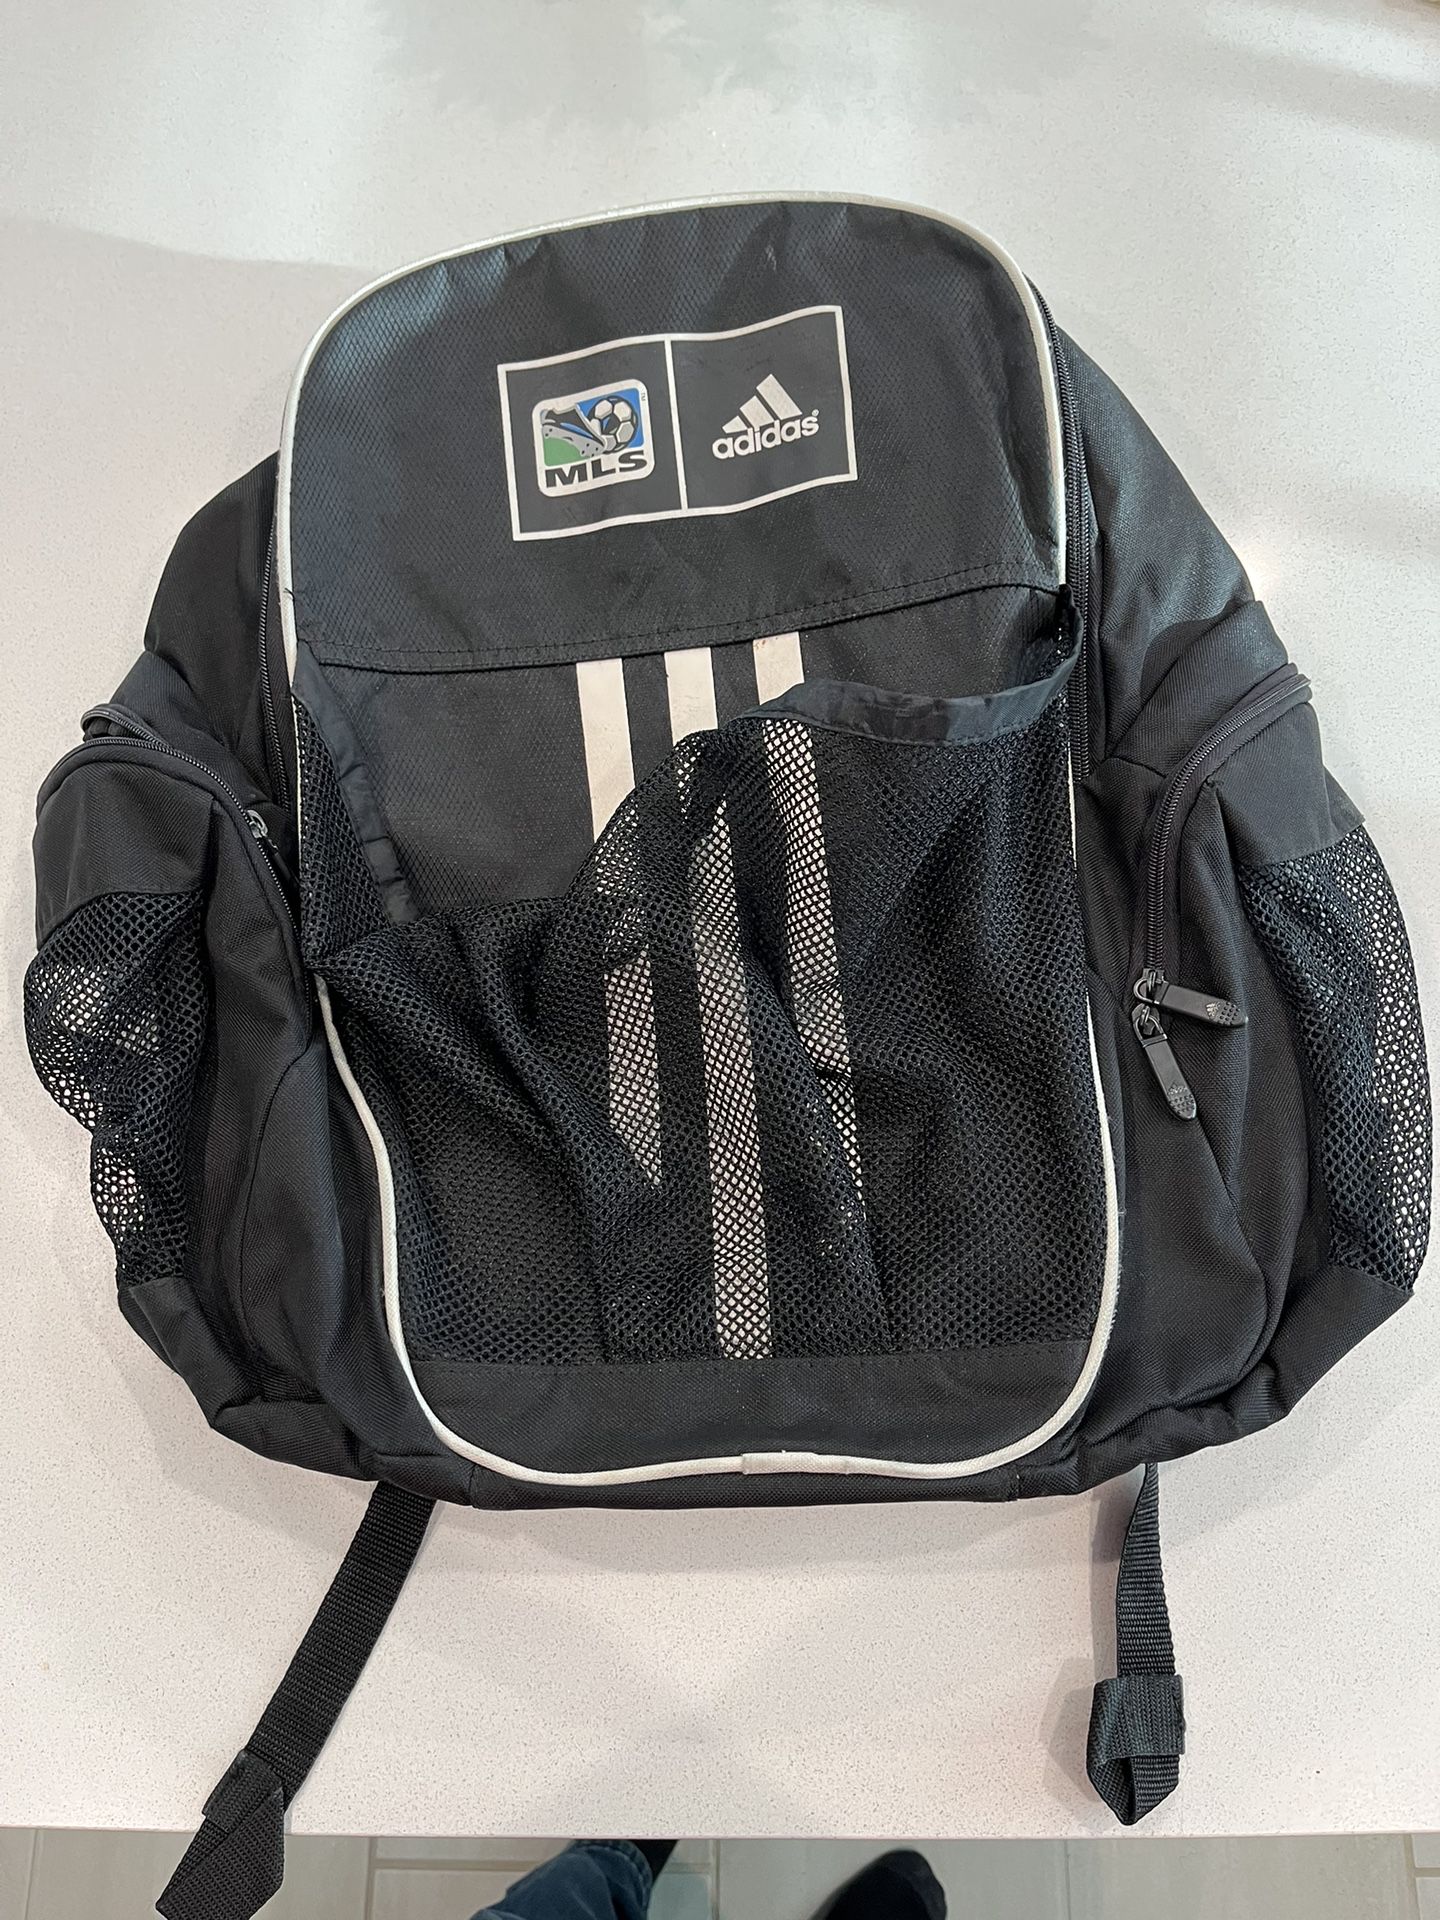 Adidas MLS Soccer Backpack - Large Size